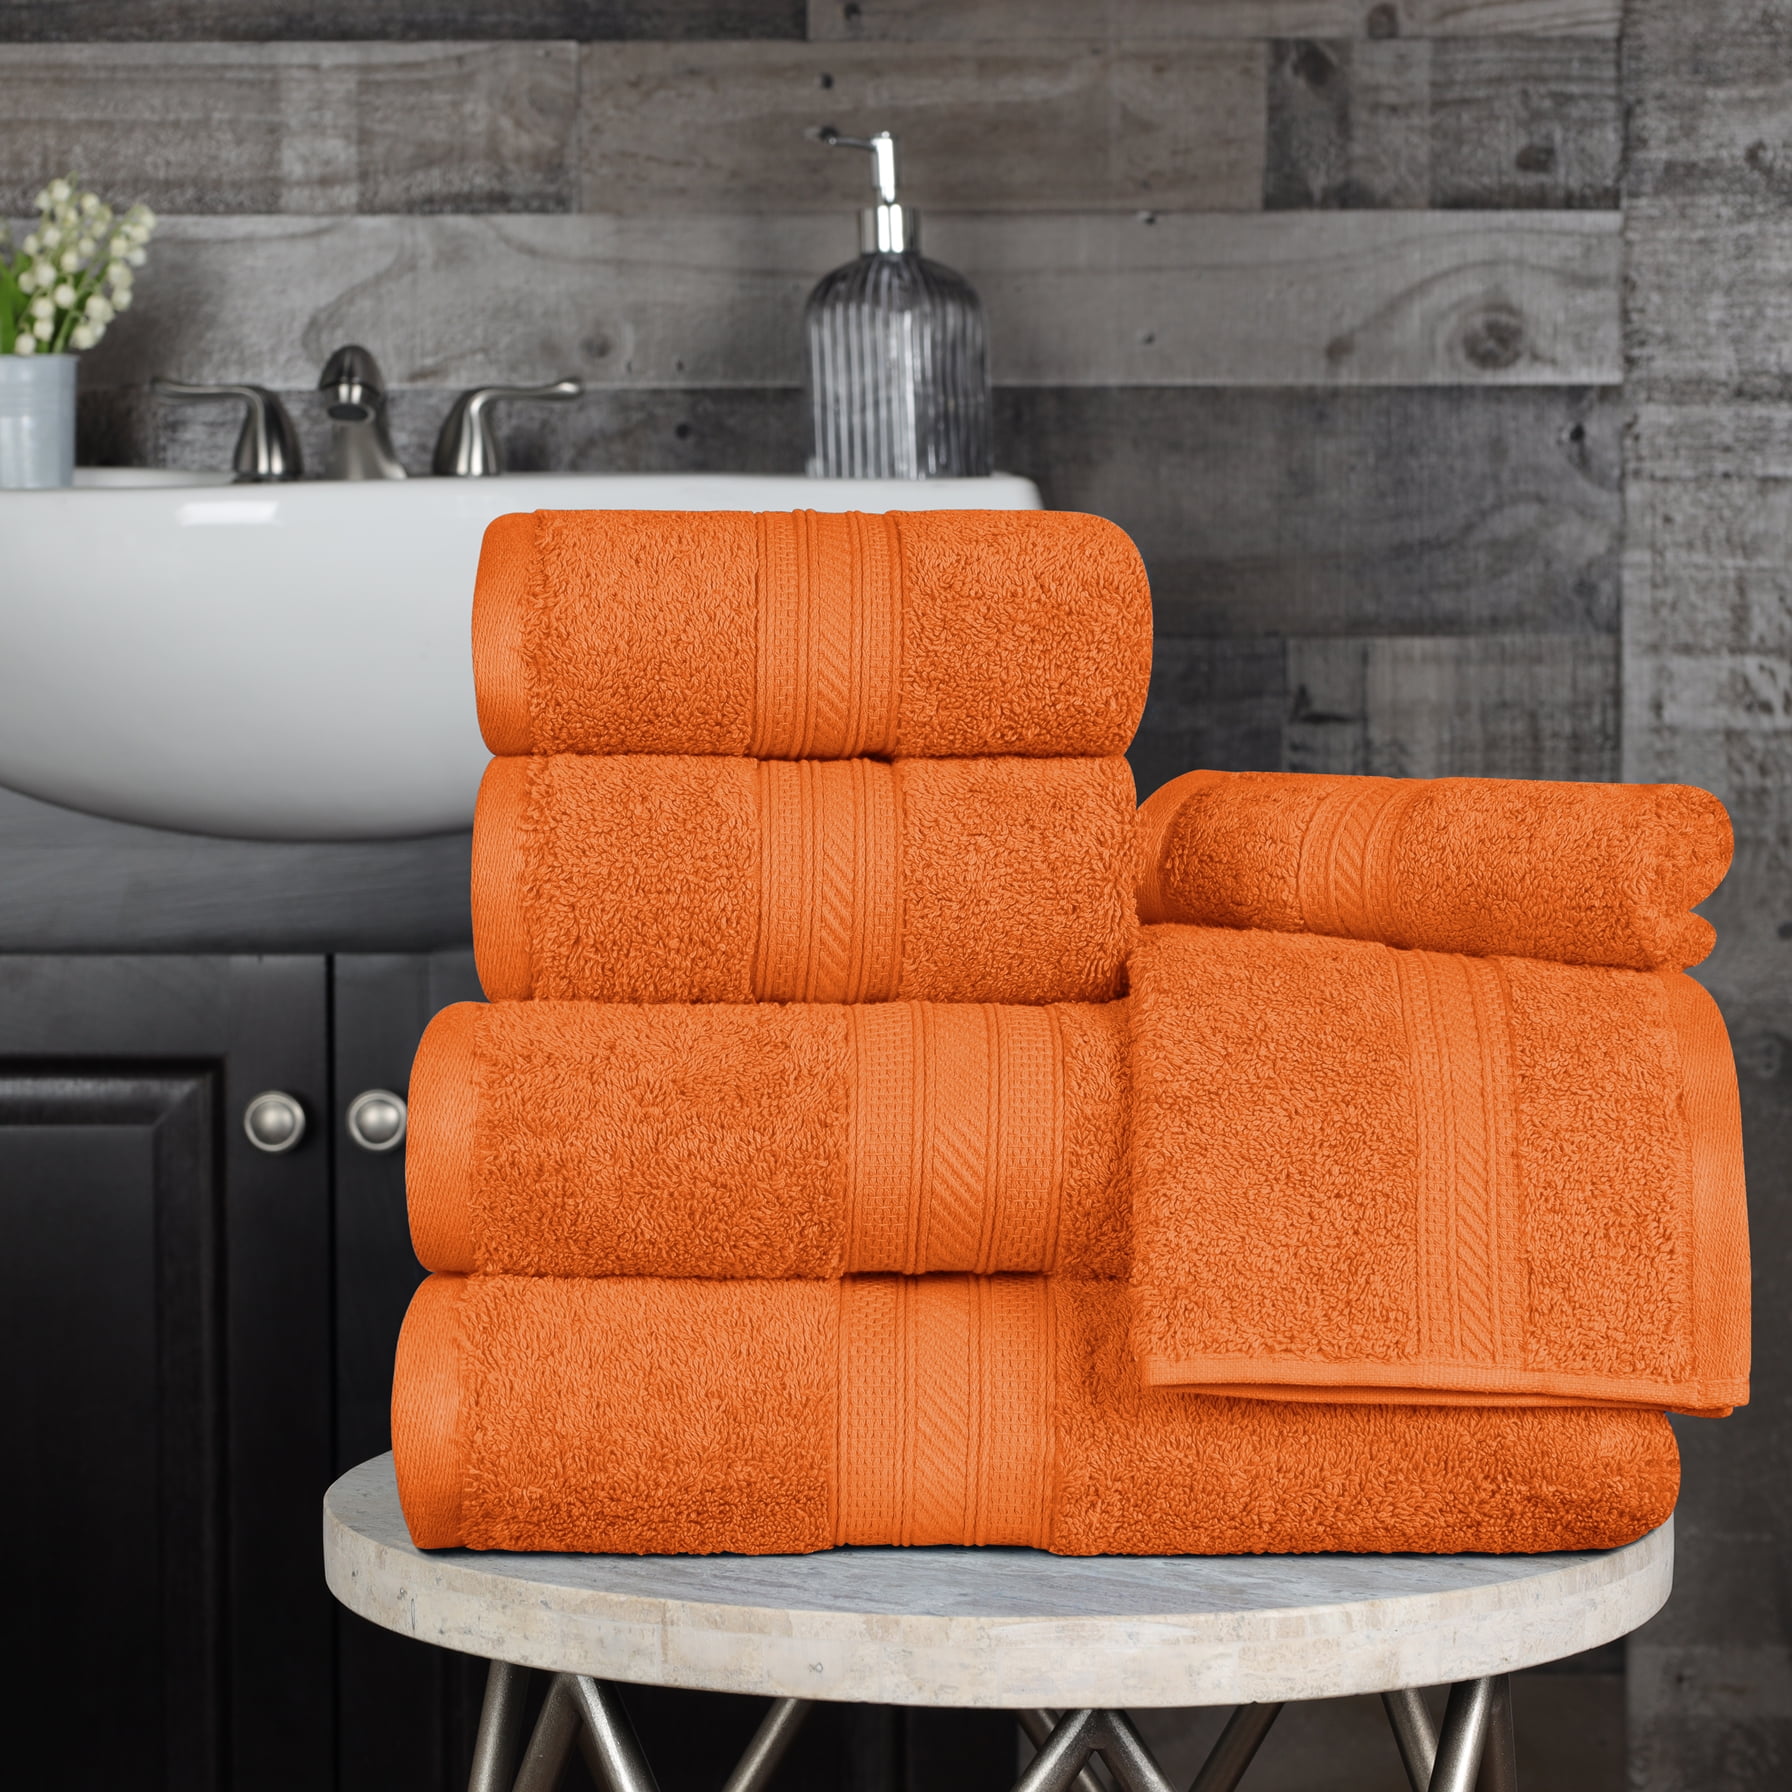 Free Shipping Towel Set Details about   Essence 6-PC 